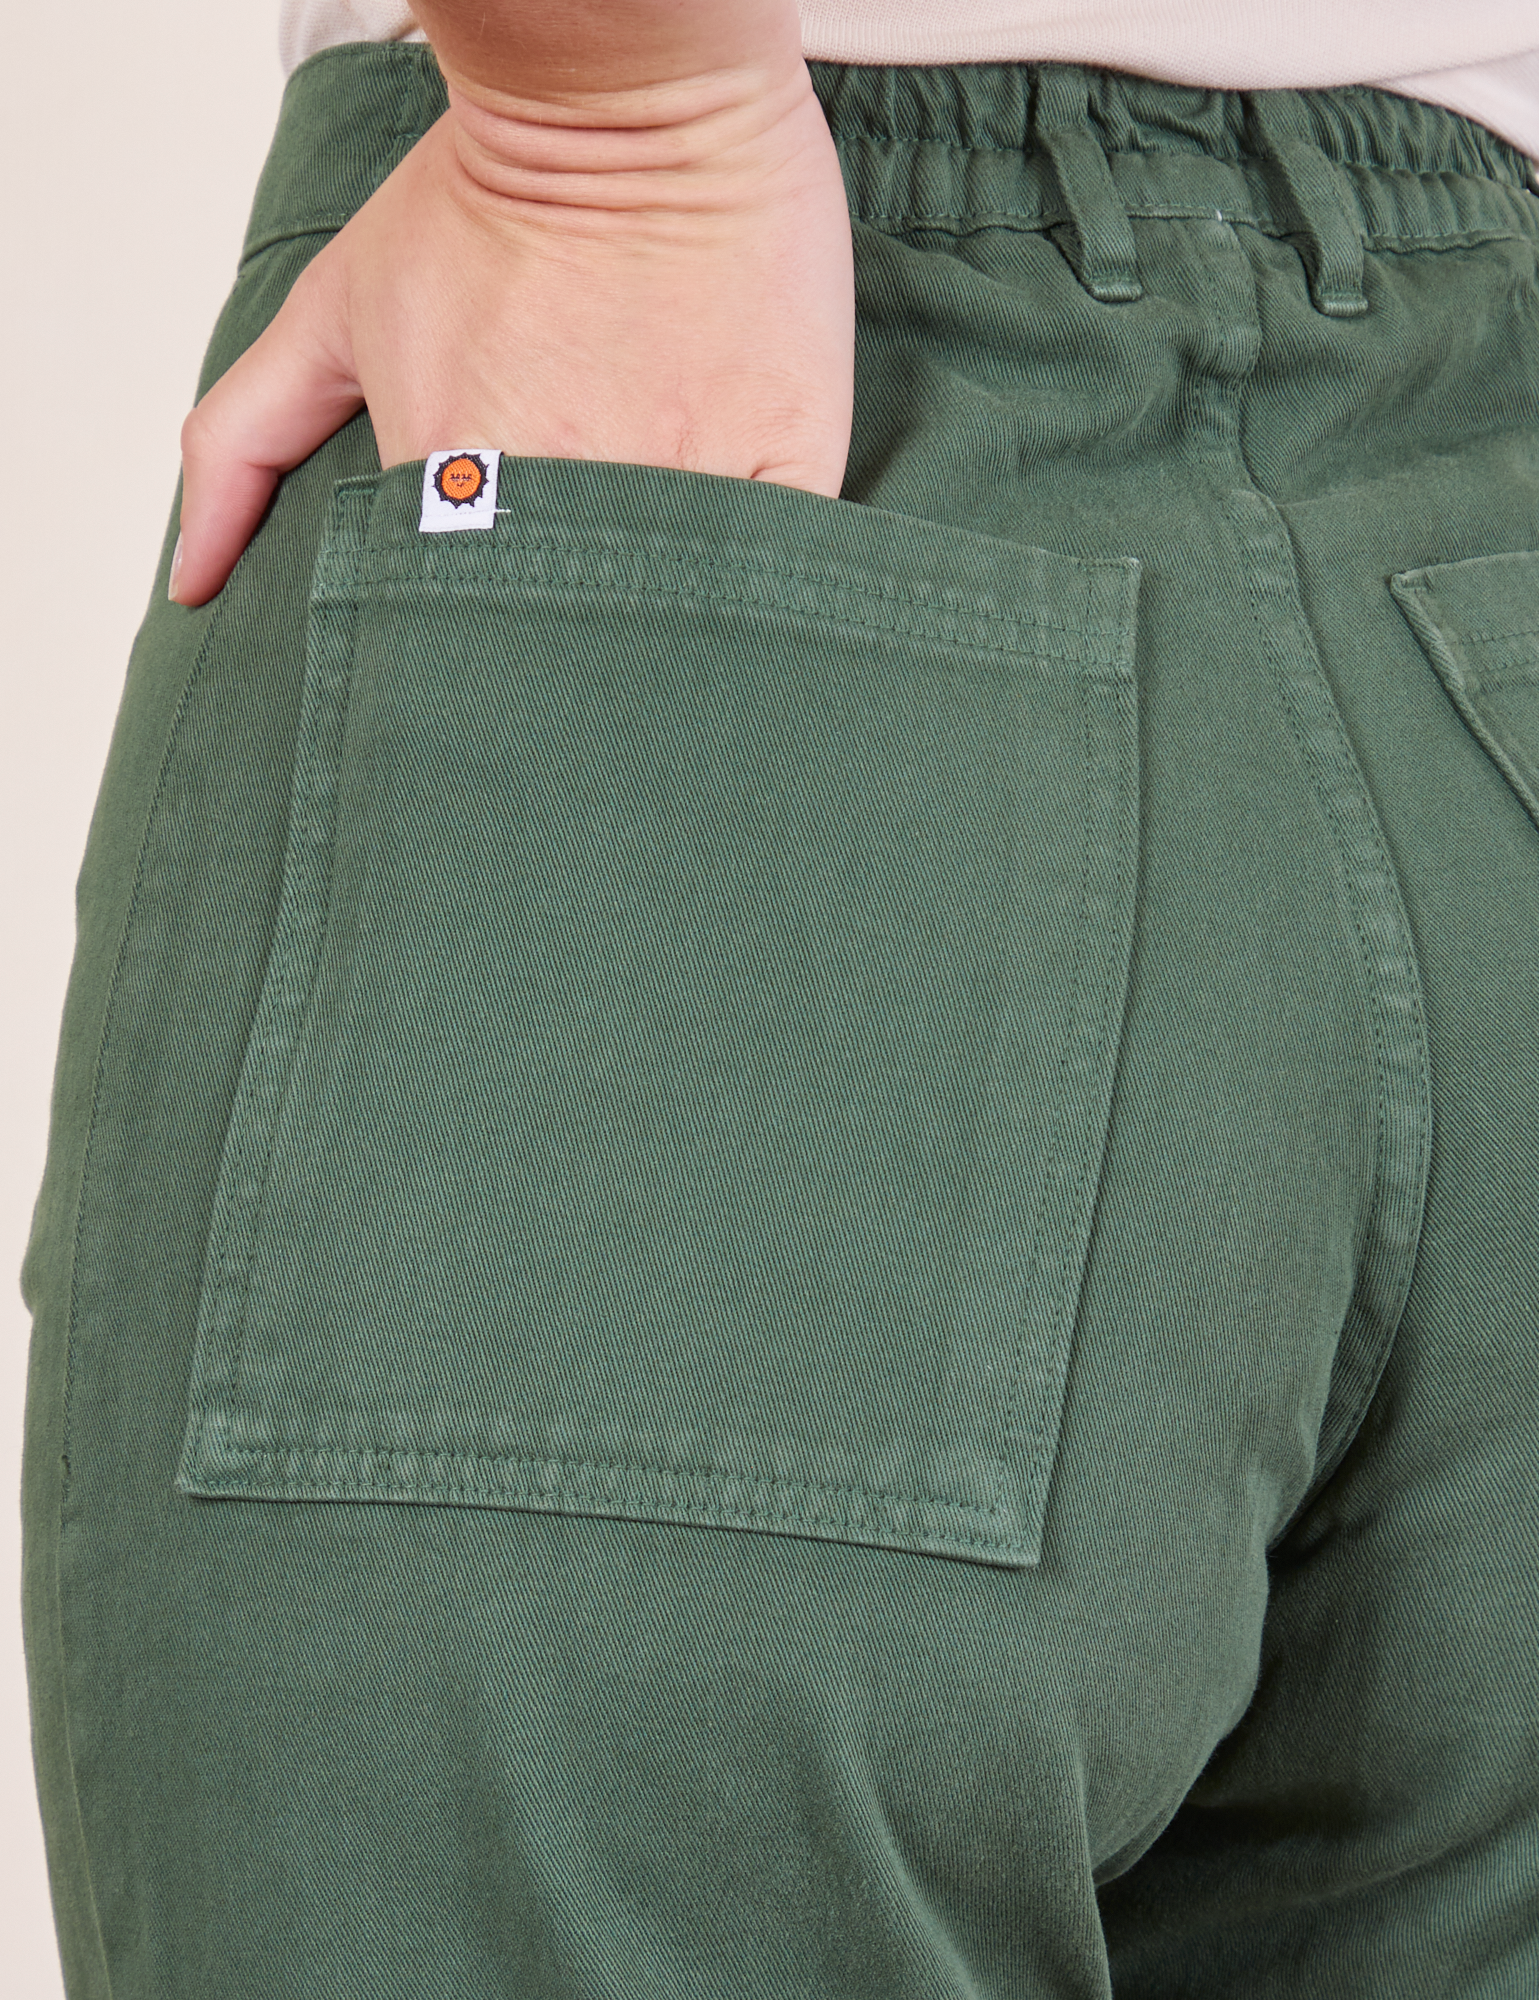 Back pocket close up of Western Pants in Dark Green Emerald. Alex has her hand in the pocket.